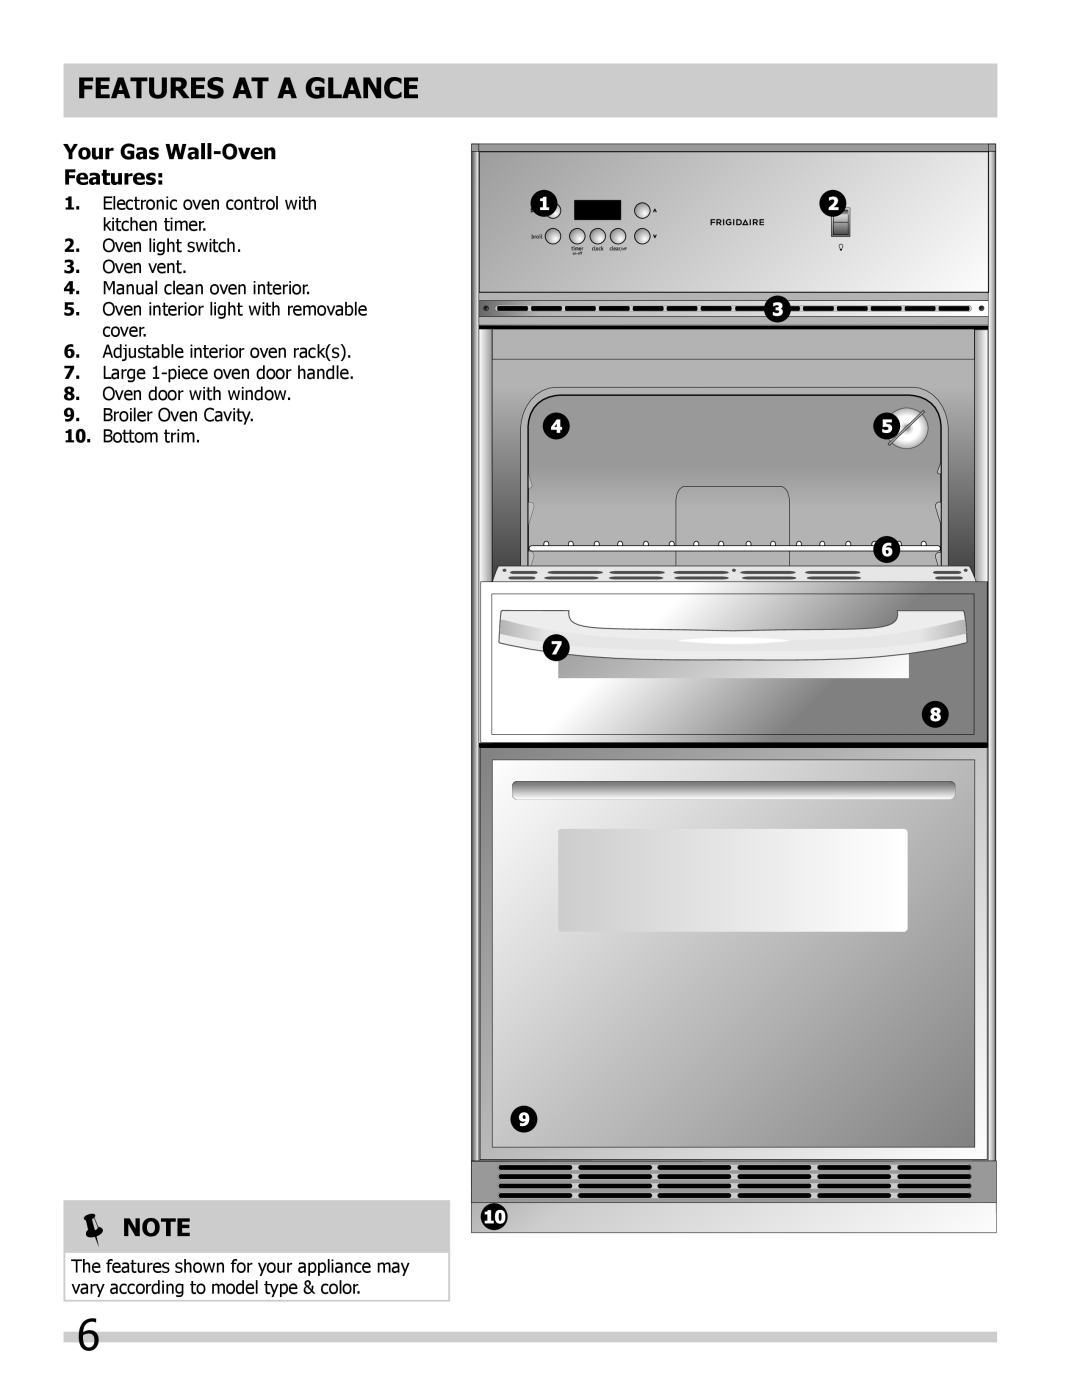 Frigidaire FGB24T3EC, FGB24T3ES, FGB24T3EB Features At A Glance, Your Gas Wall-Oven Features, Note 